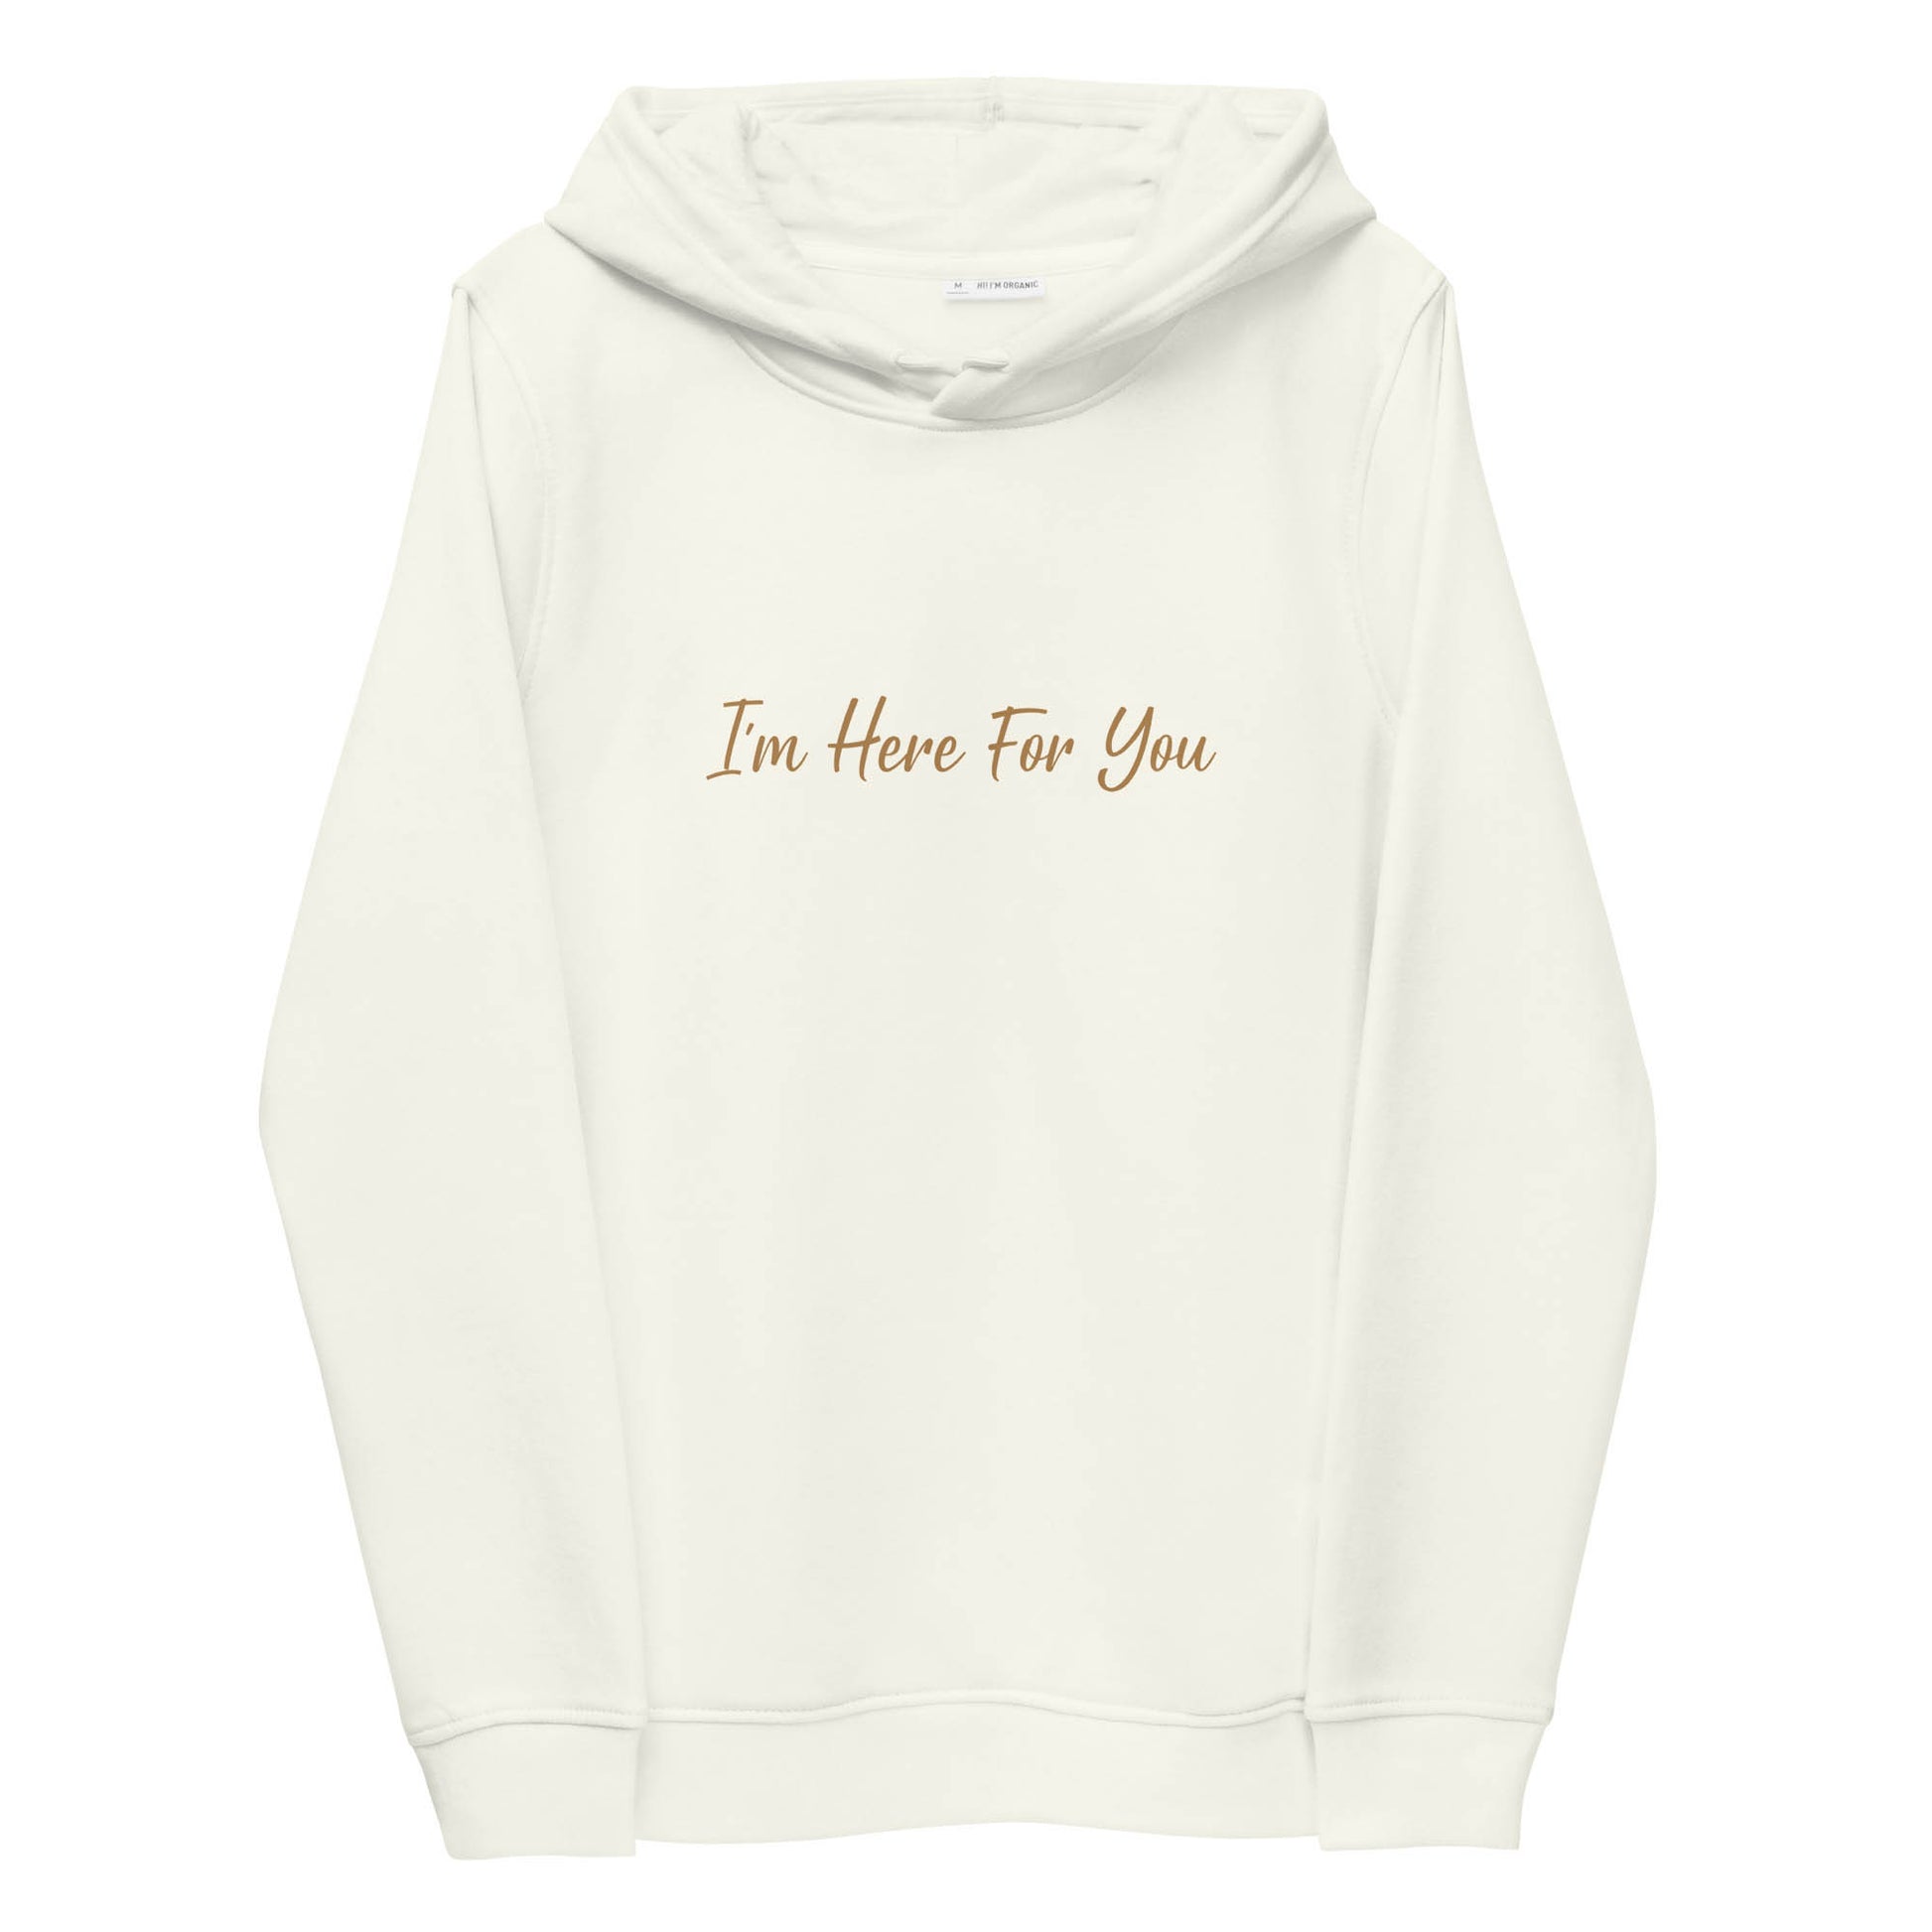 Women off-white sustainable hoodie with inspirational quote, "I'm Here For You."